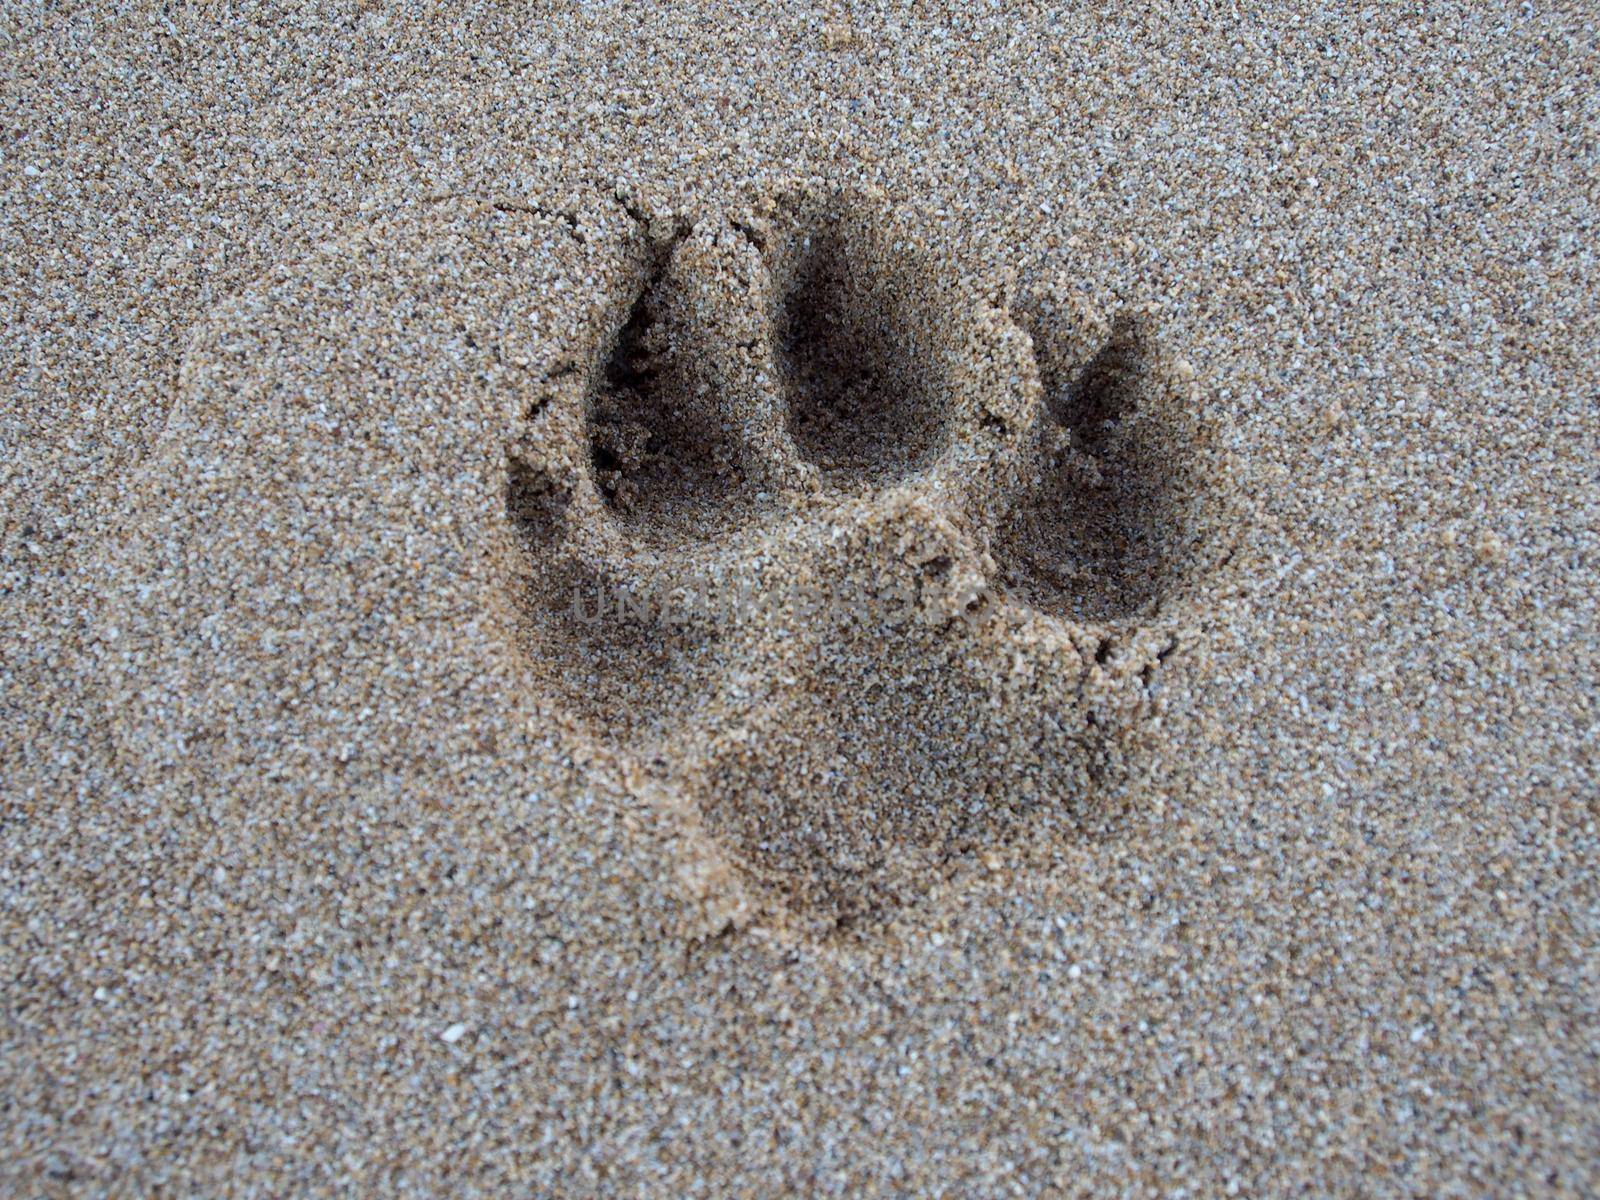 Dog Paw Print in the Sand by EricGBVD